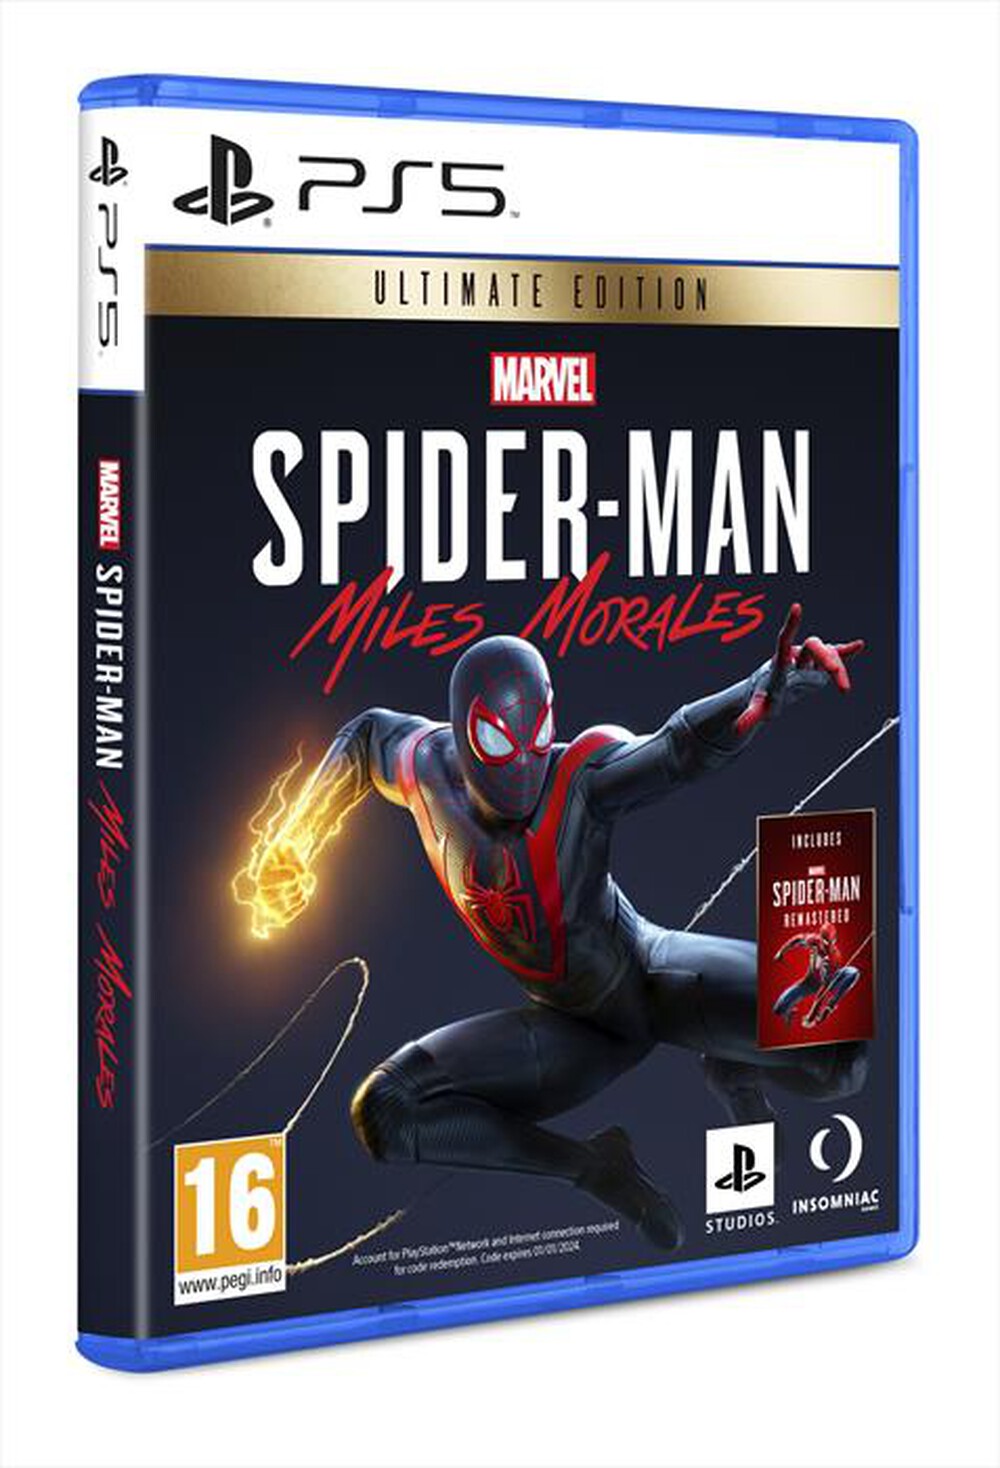 "SONY COMPUTER - MARVEL'S SPIDER-MAN MILES MORALES ULTIMATE ED-PS5 - "